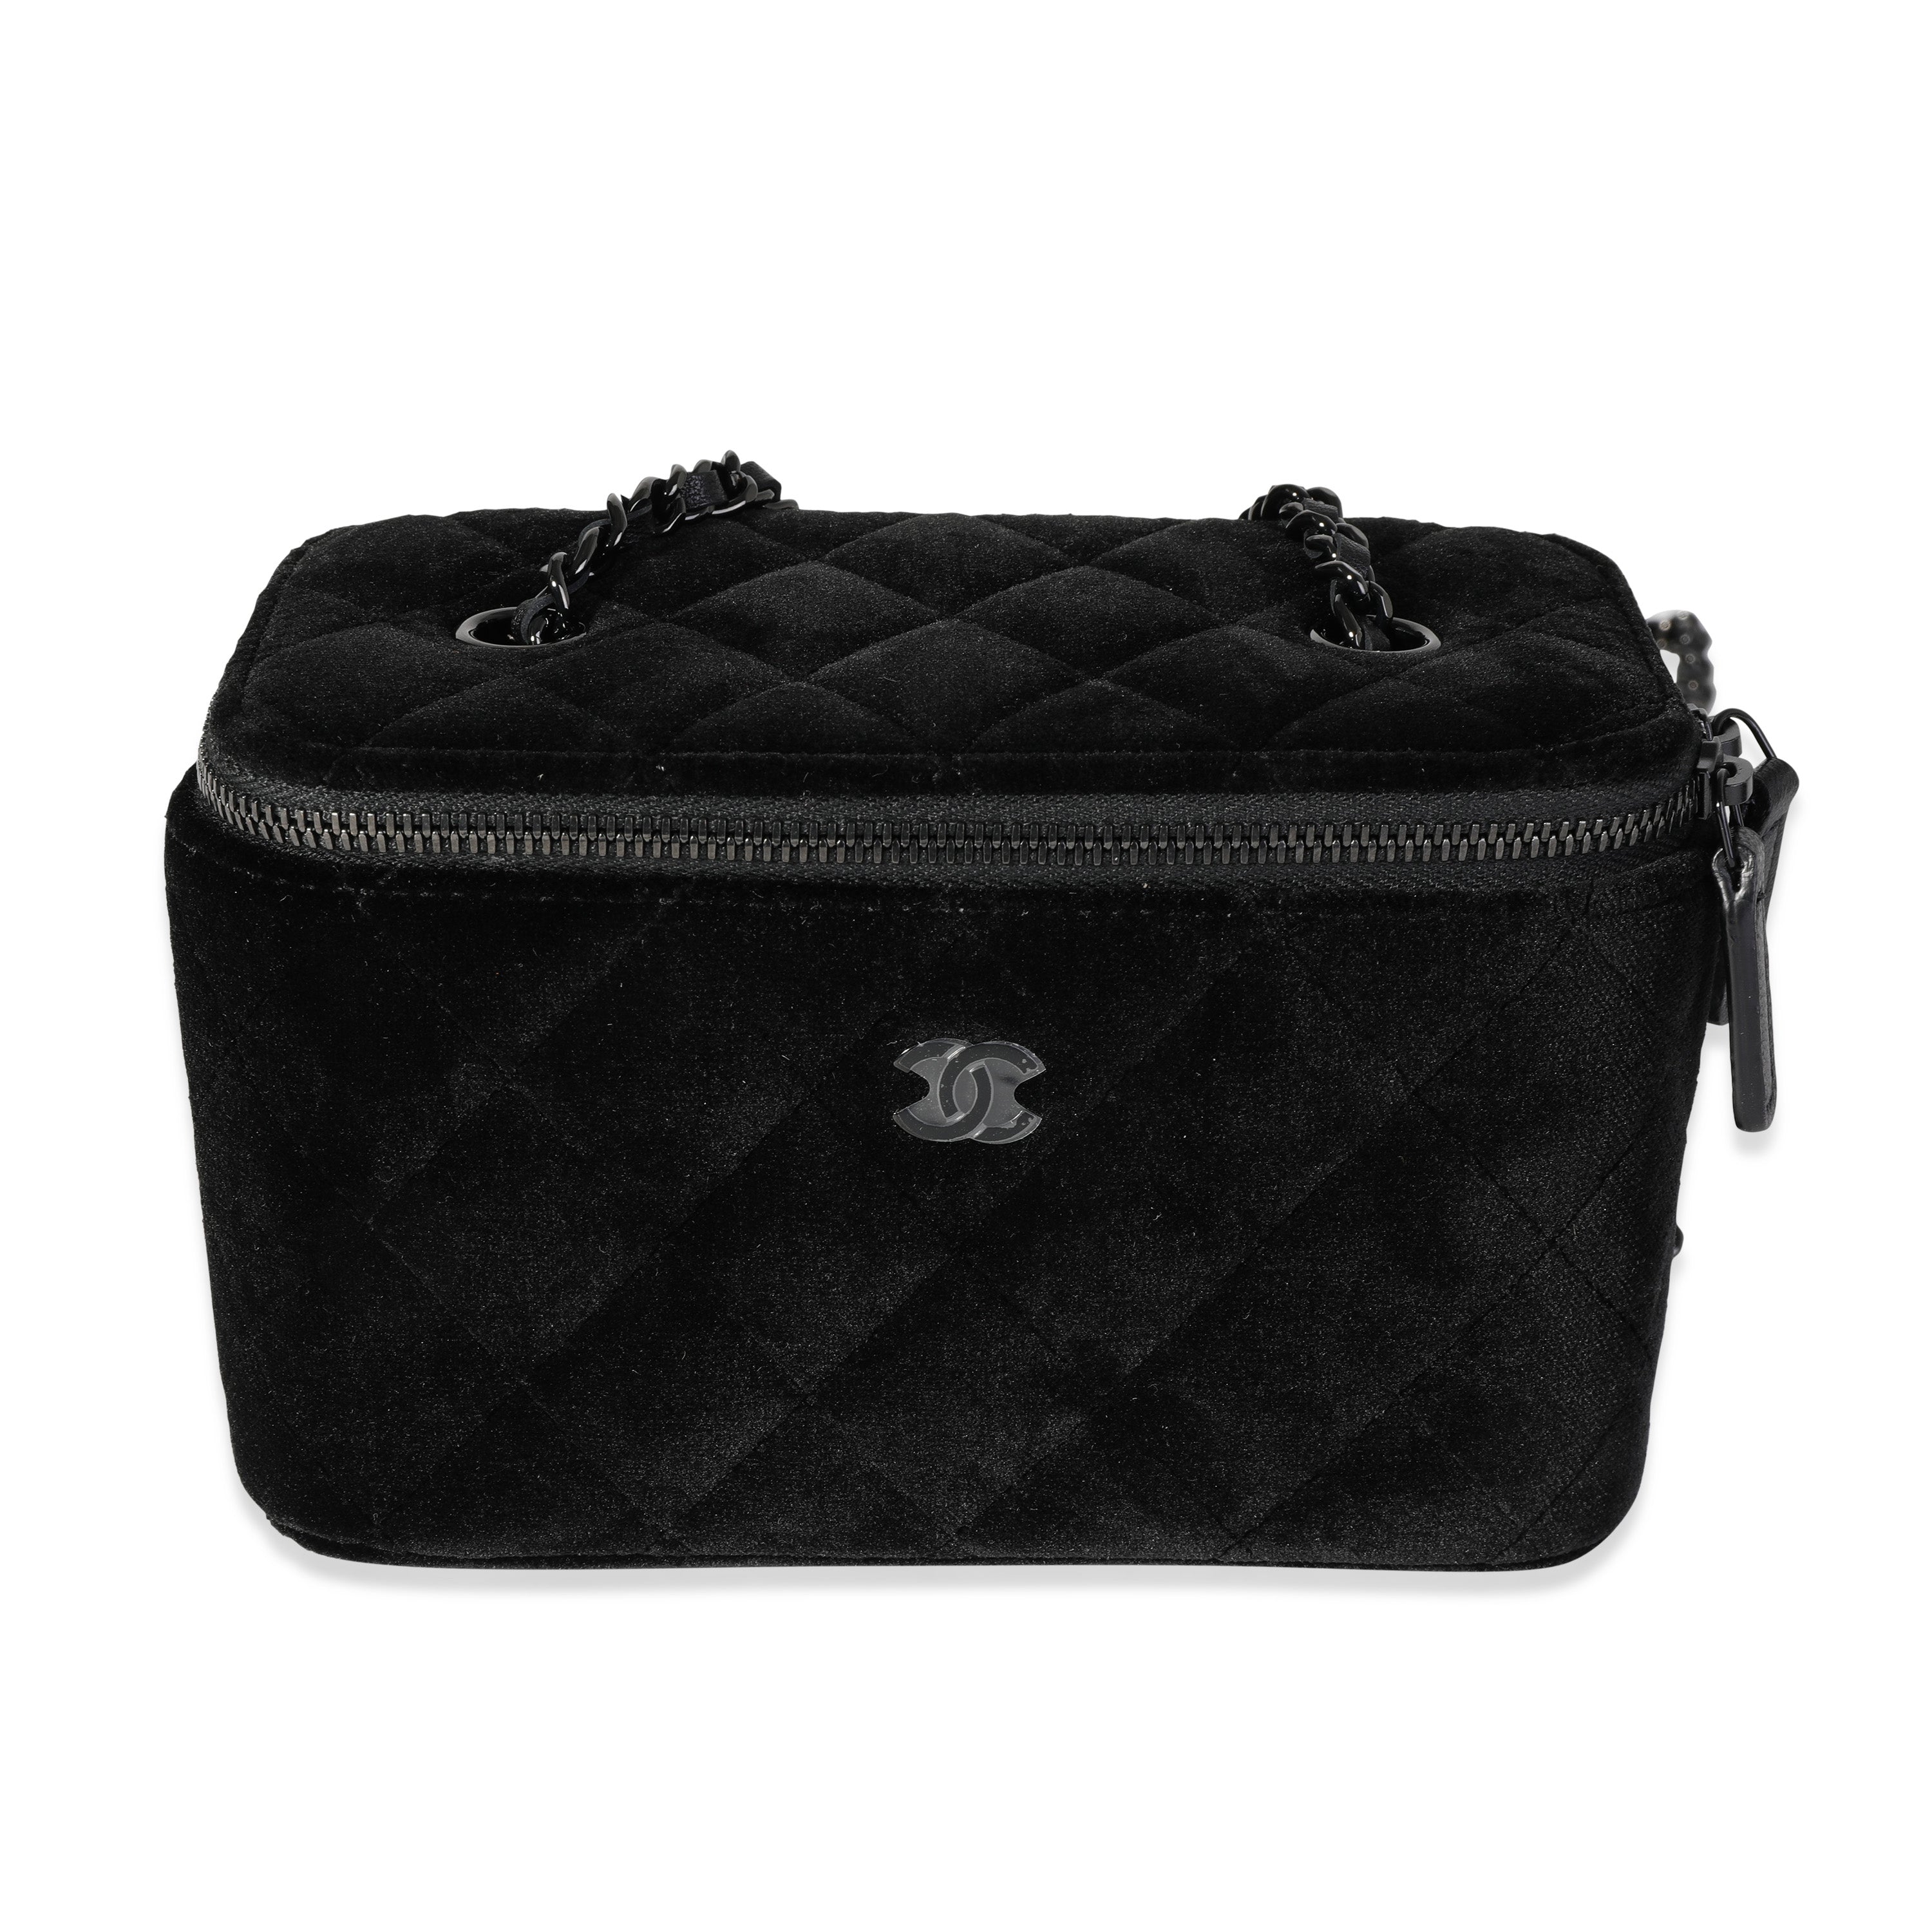 Chanel 22K Black Leather Vanity With Chain, myGemma, SG